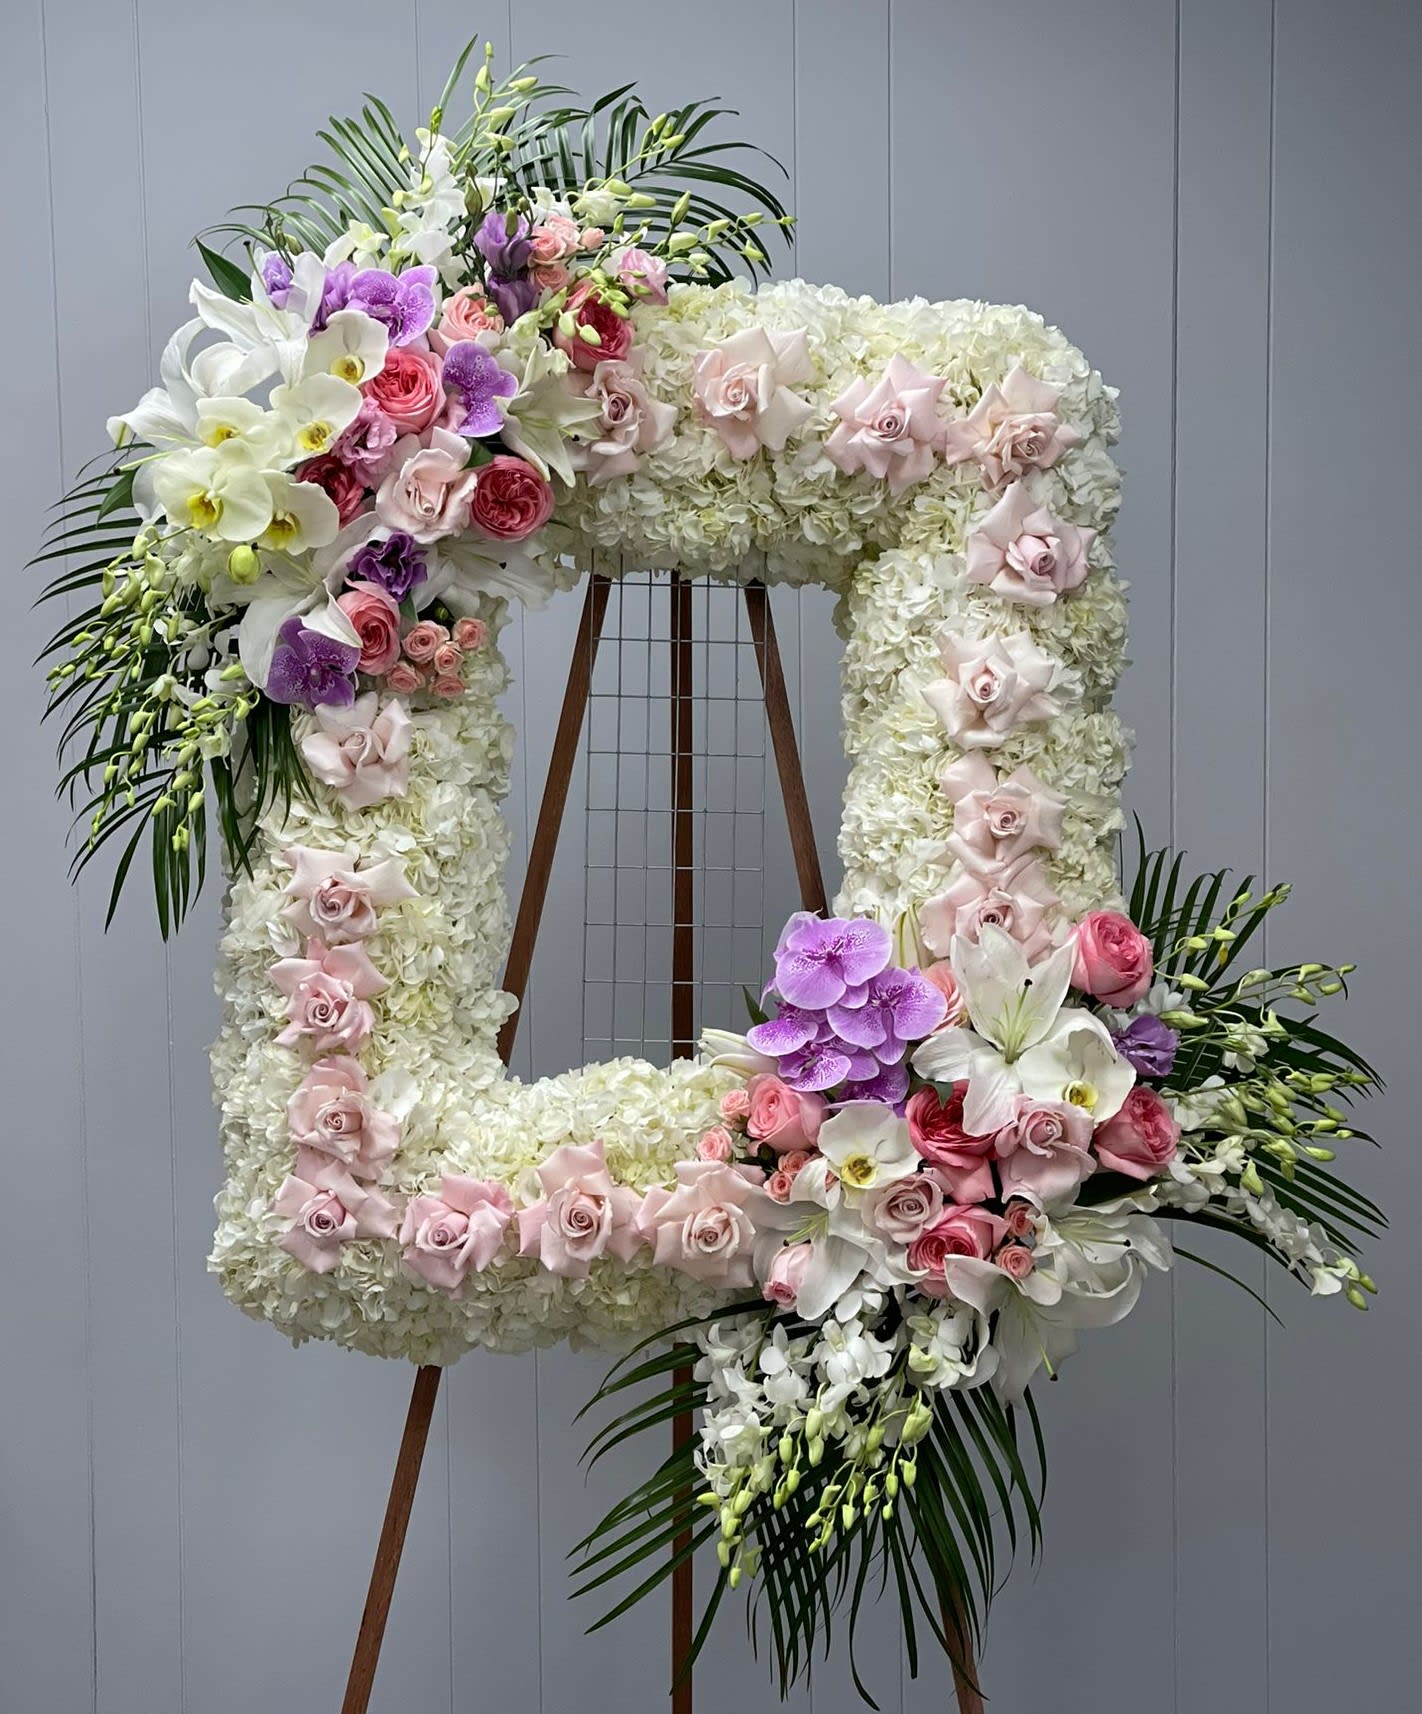 Memorial Frame Spray 1 - This luxurious frame spray is designed by Kenneth Village Flowers as an addition to any memorial service. This arrangement features majestic white hydrangeas that will ease the minds and comfort the souls that are grieving with lilies, orchids and roses to represent the vibrance of their life. 